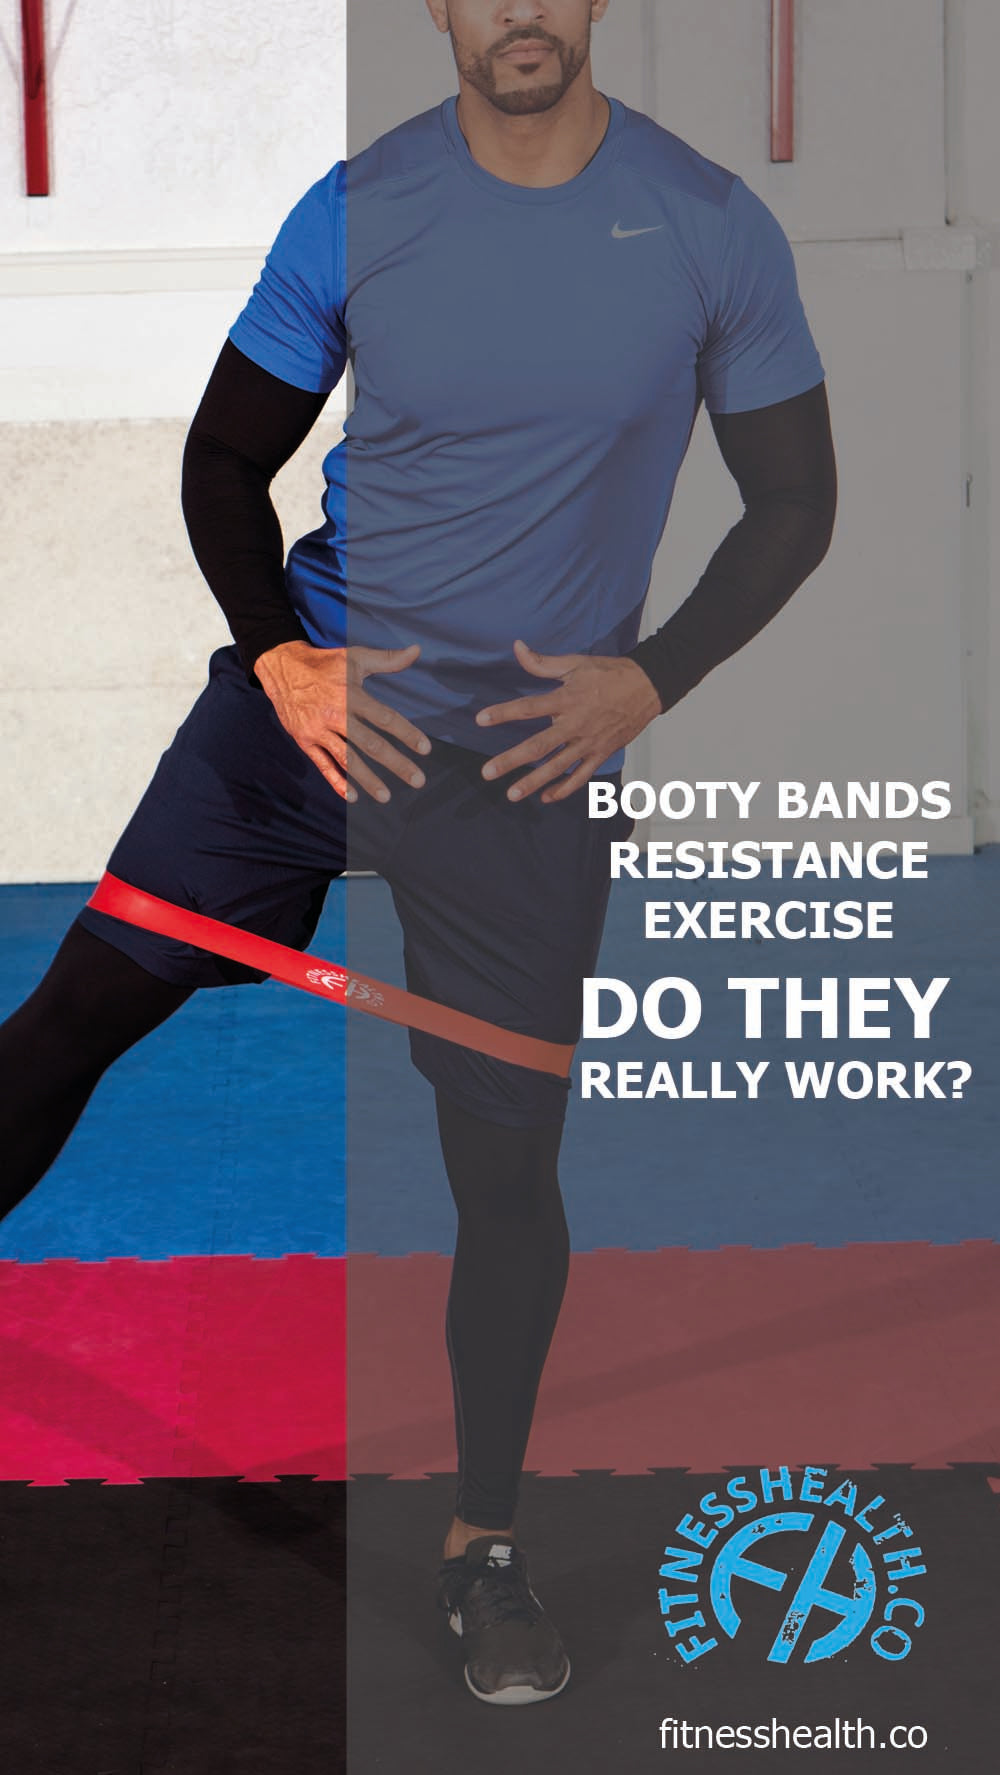 BOOTY BANDS RESISTANCE EXERCISE DO THEY REALLY WORK? - Fitness Health 